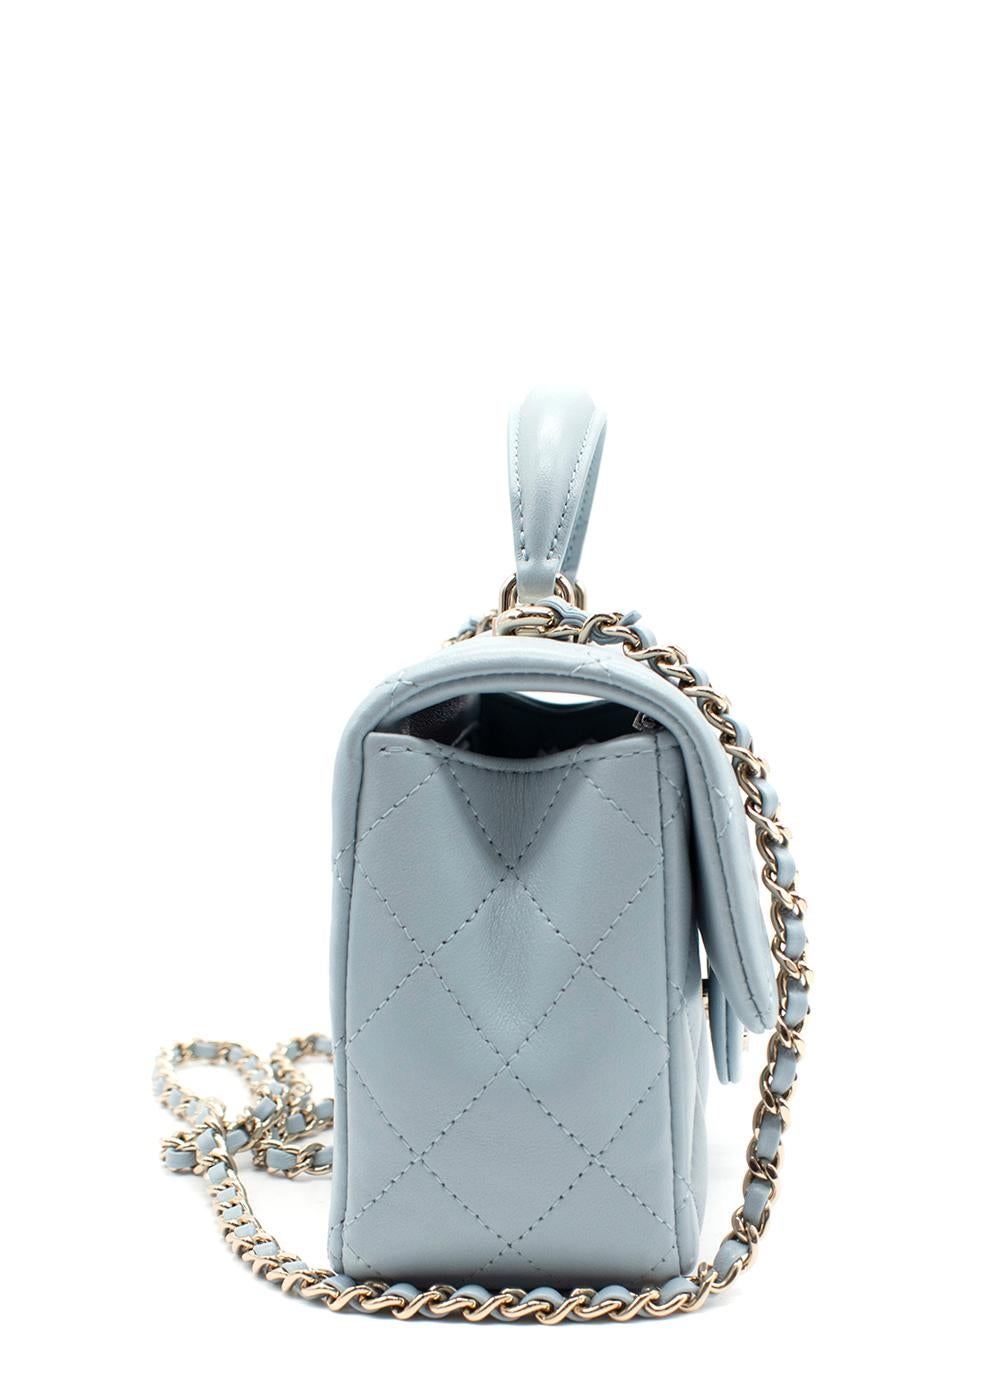 Chanel Sky Blue Leather Quilted Mini Top Handle Flap Bag

- Sky blue lambskin outer, with signature diamond quilting
- Top handle flap, with CC turnlock closure
- Leather and chain strap
- Opens to leather-lined interior with zipped pocket and logo